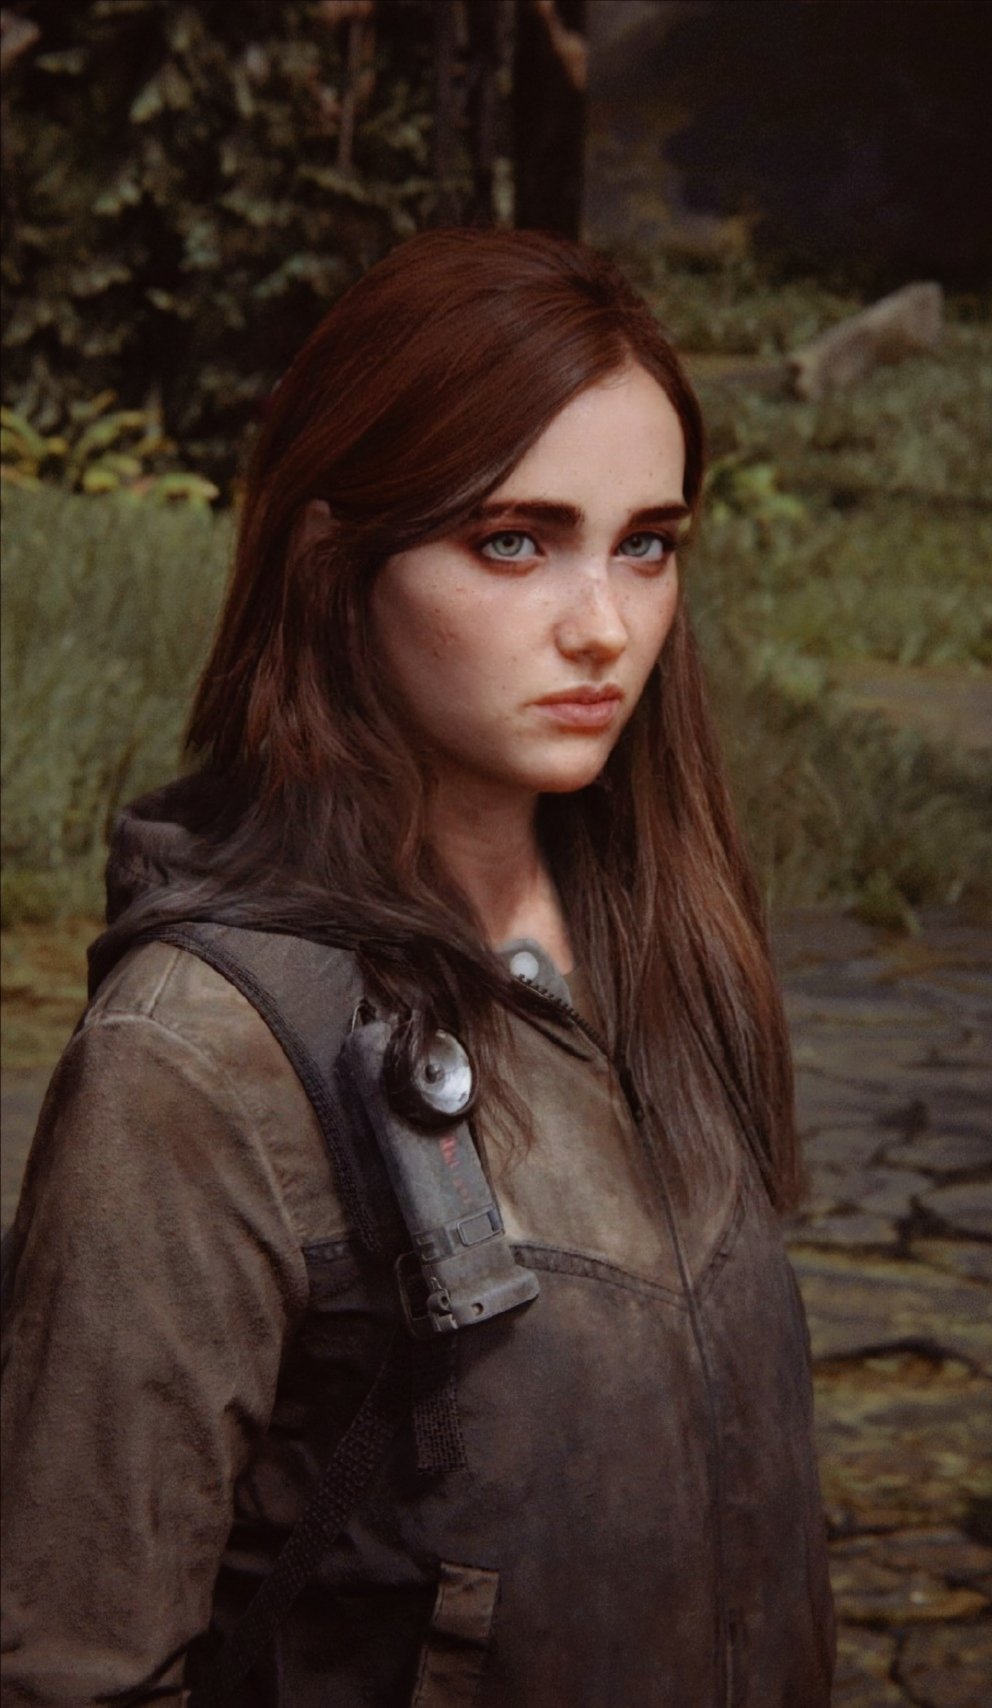 Ellie Williams♡ on X: ✨Long Curly Hair Ellie✨ Somebody needs to tell Ellie  that her looks can kill 🥺🥺🥺😍❤ #TheLastofUsPartII #TheLastofUsPart2  #TLOU2 #TLOU #EllieWilliams #Ellie #VirtualPhotography #PS4 #PS4share   / X